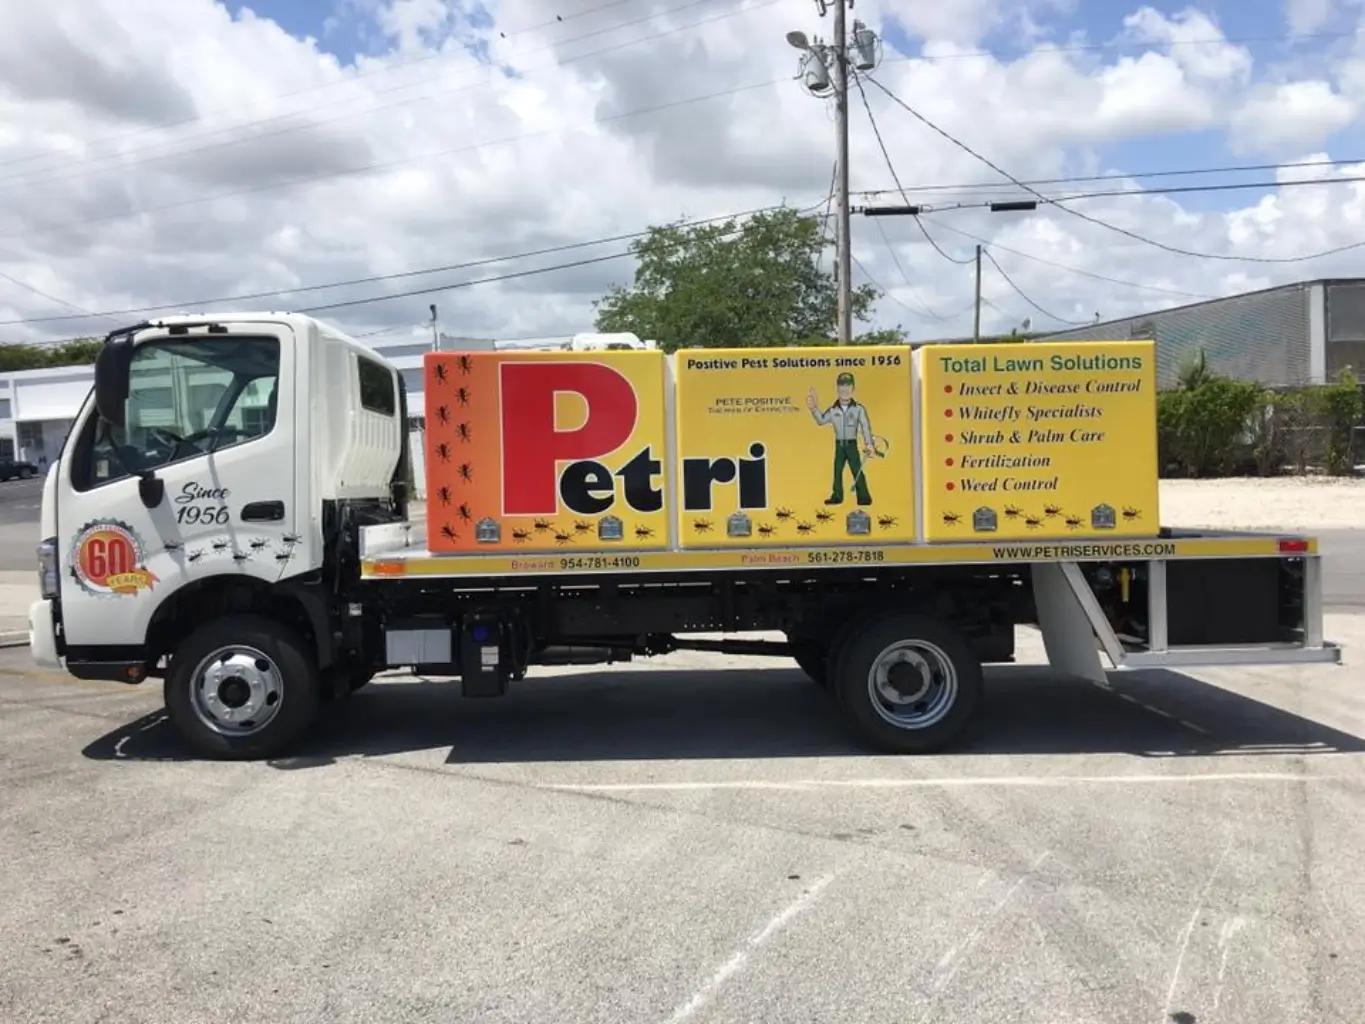 Expert Pest Control services by Petri Pest Control in South Florida